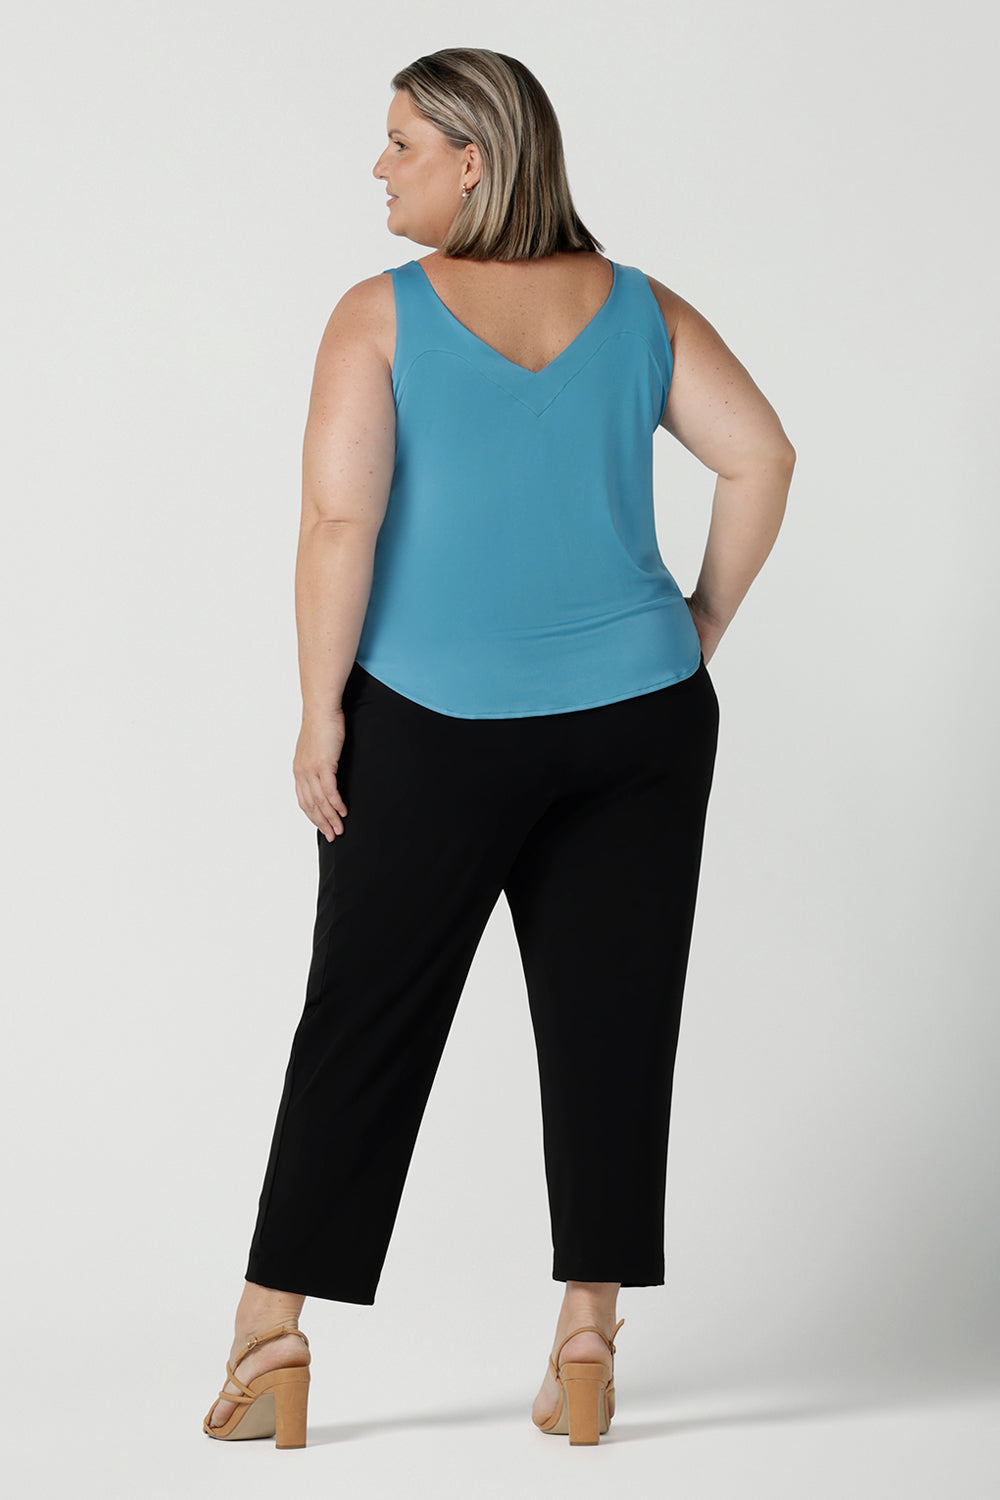 Back view of a size 18 Woman wears the Tobie Pant in Black back with the Eddy Cami in Mineral. These pants are corporate casual pants great for work. Size inclusive corporate clothing for corporate women size 8 - 24.